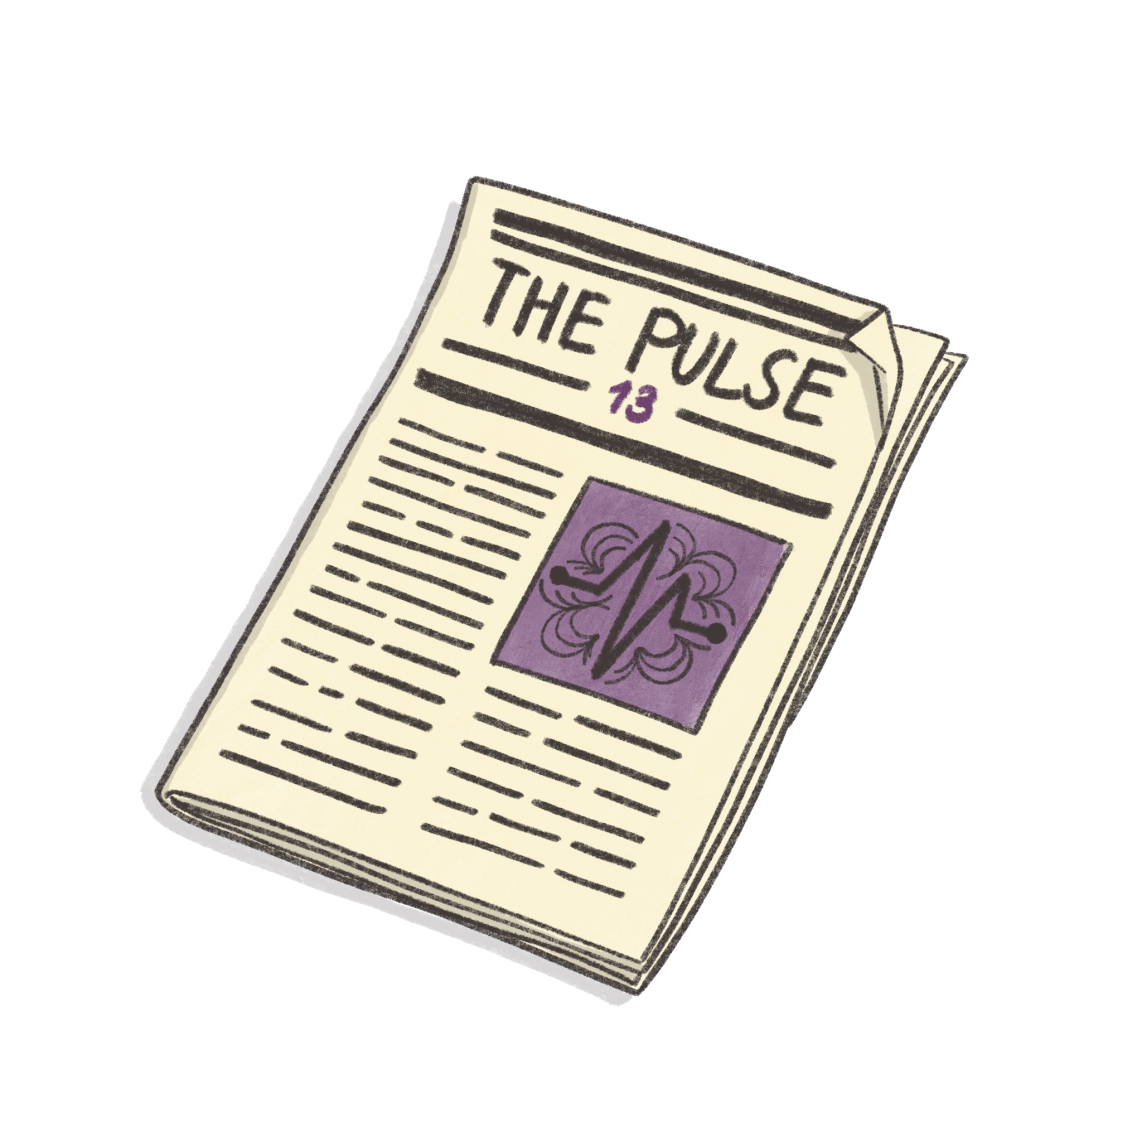 The Apoio Pulse – Issue 13